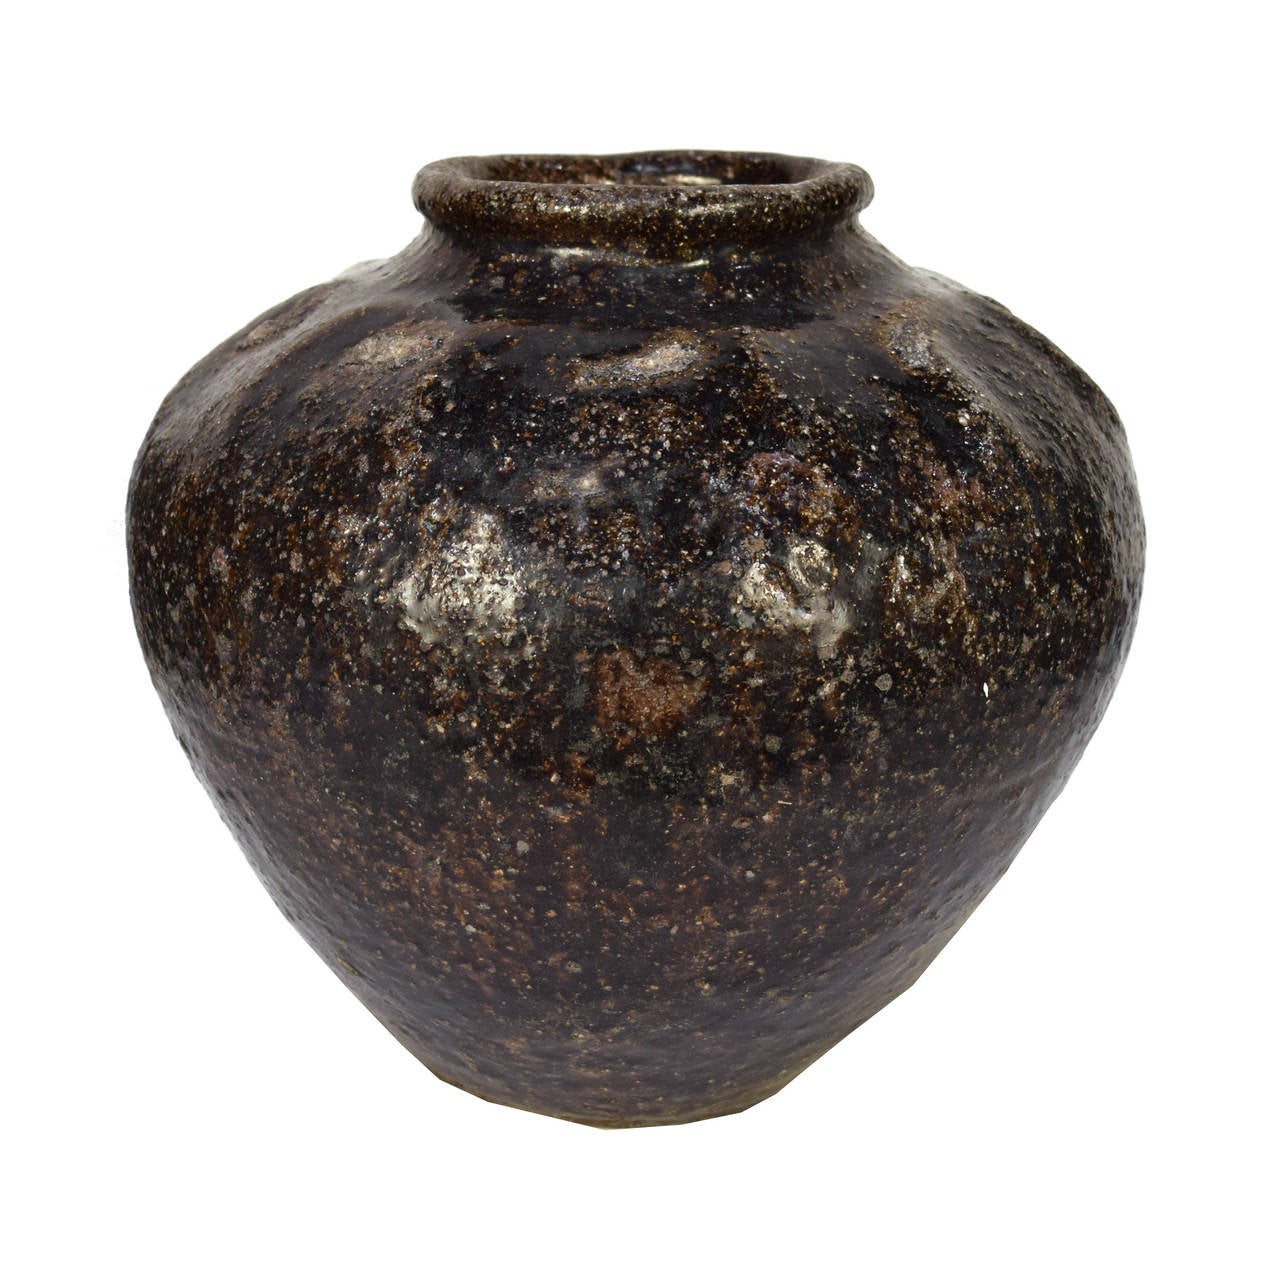 Petite c.1900 dark brown glazed ceramic jars from Southern China.

Pagoda Red Collection # DVEE011